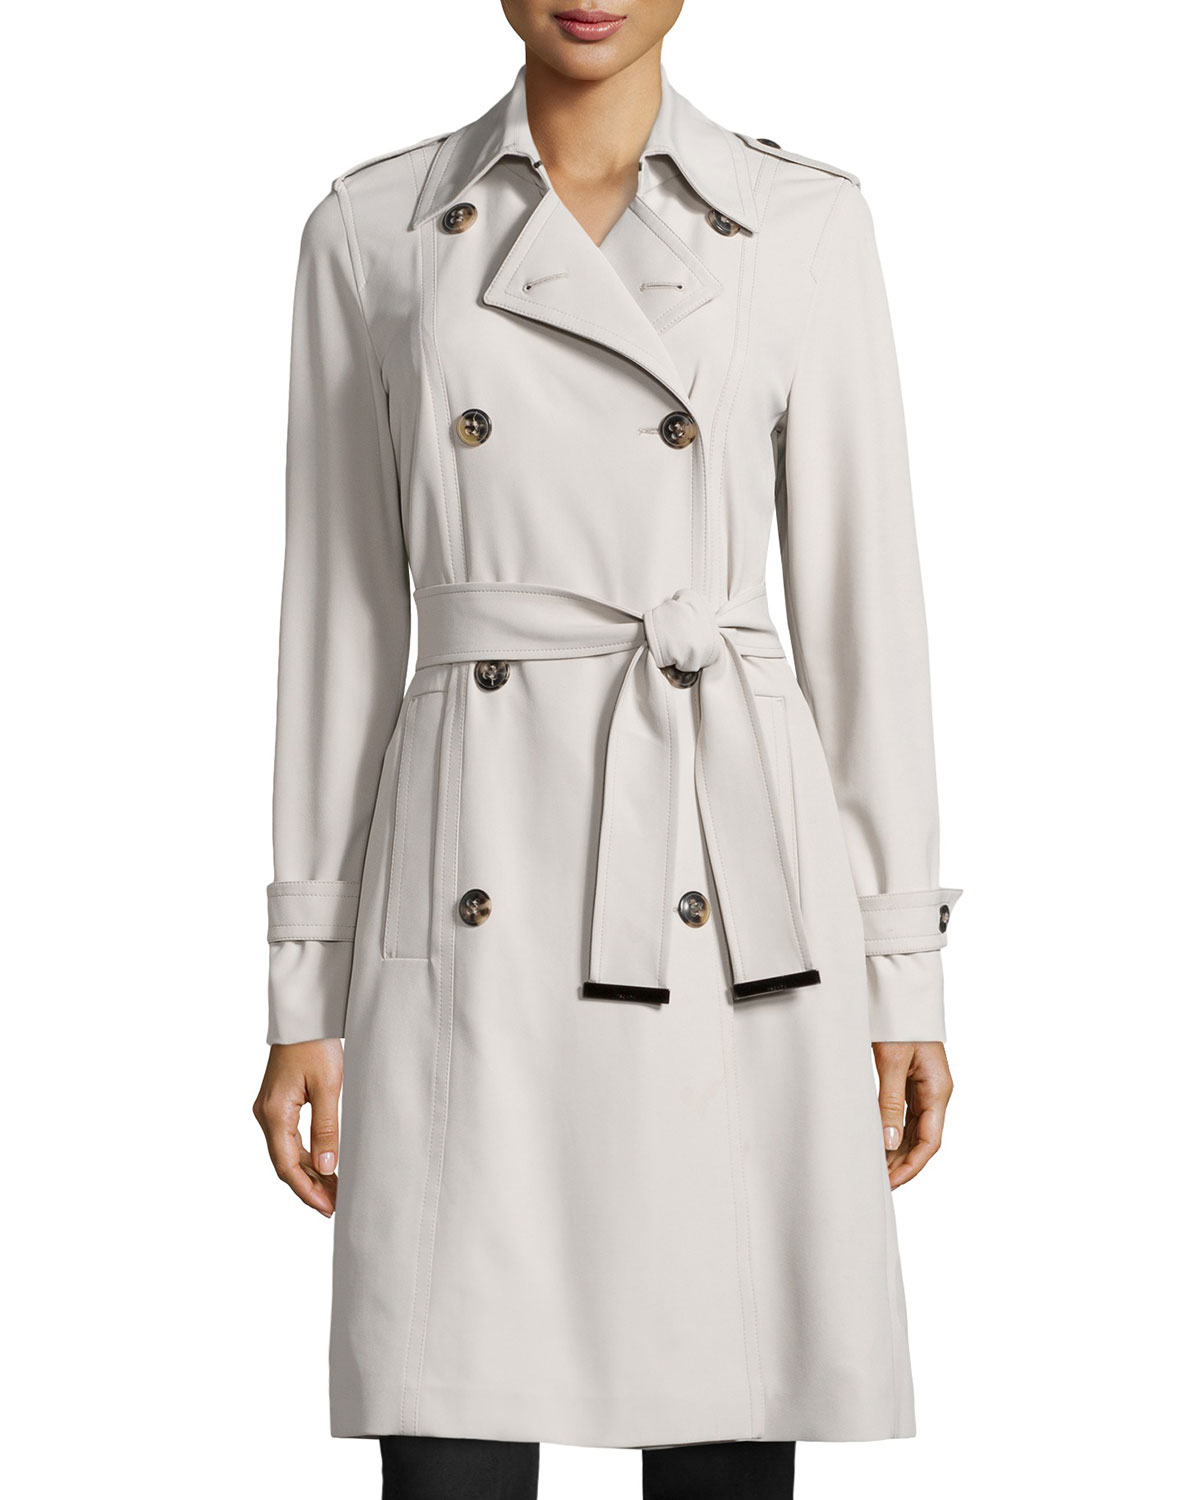 Lyst - Escada Belted A-Line Trench Coat in Gray